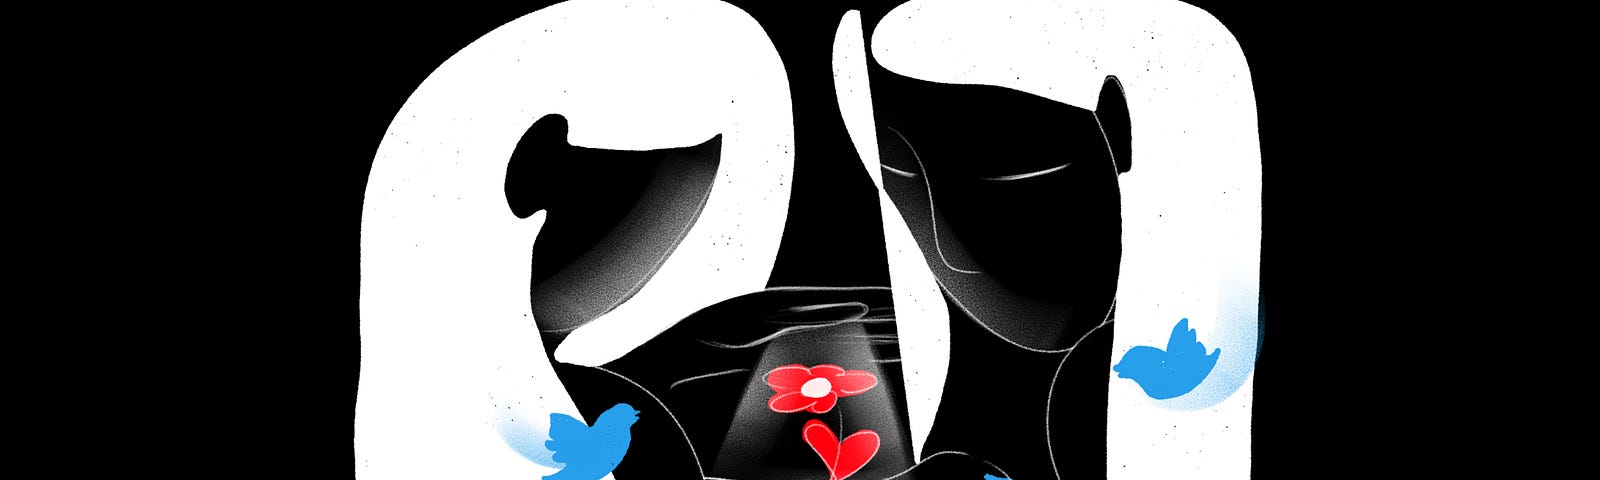 Illustration of two girls conjuring a flower made of hearts while blue twitter birds circle them.